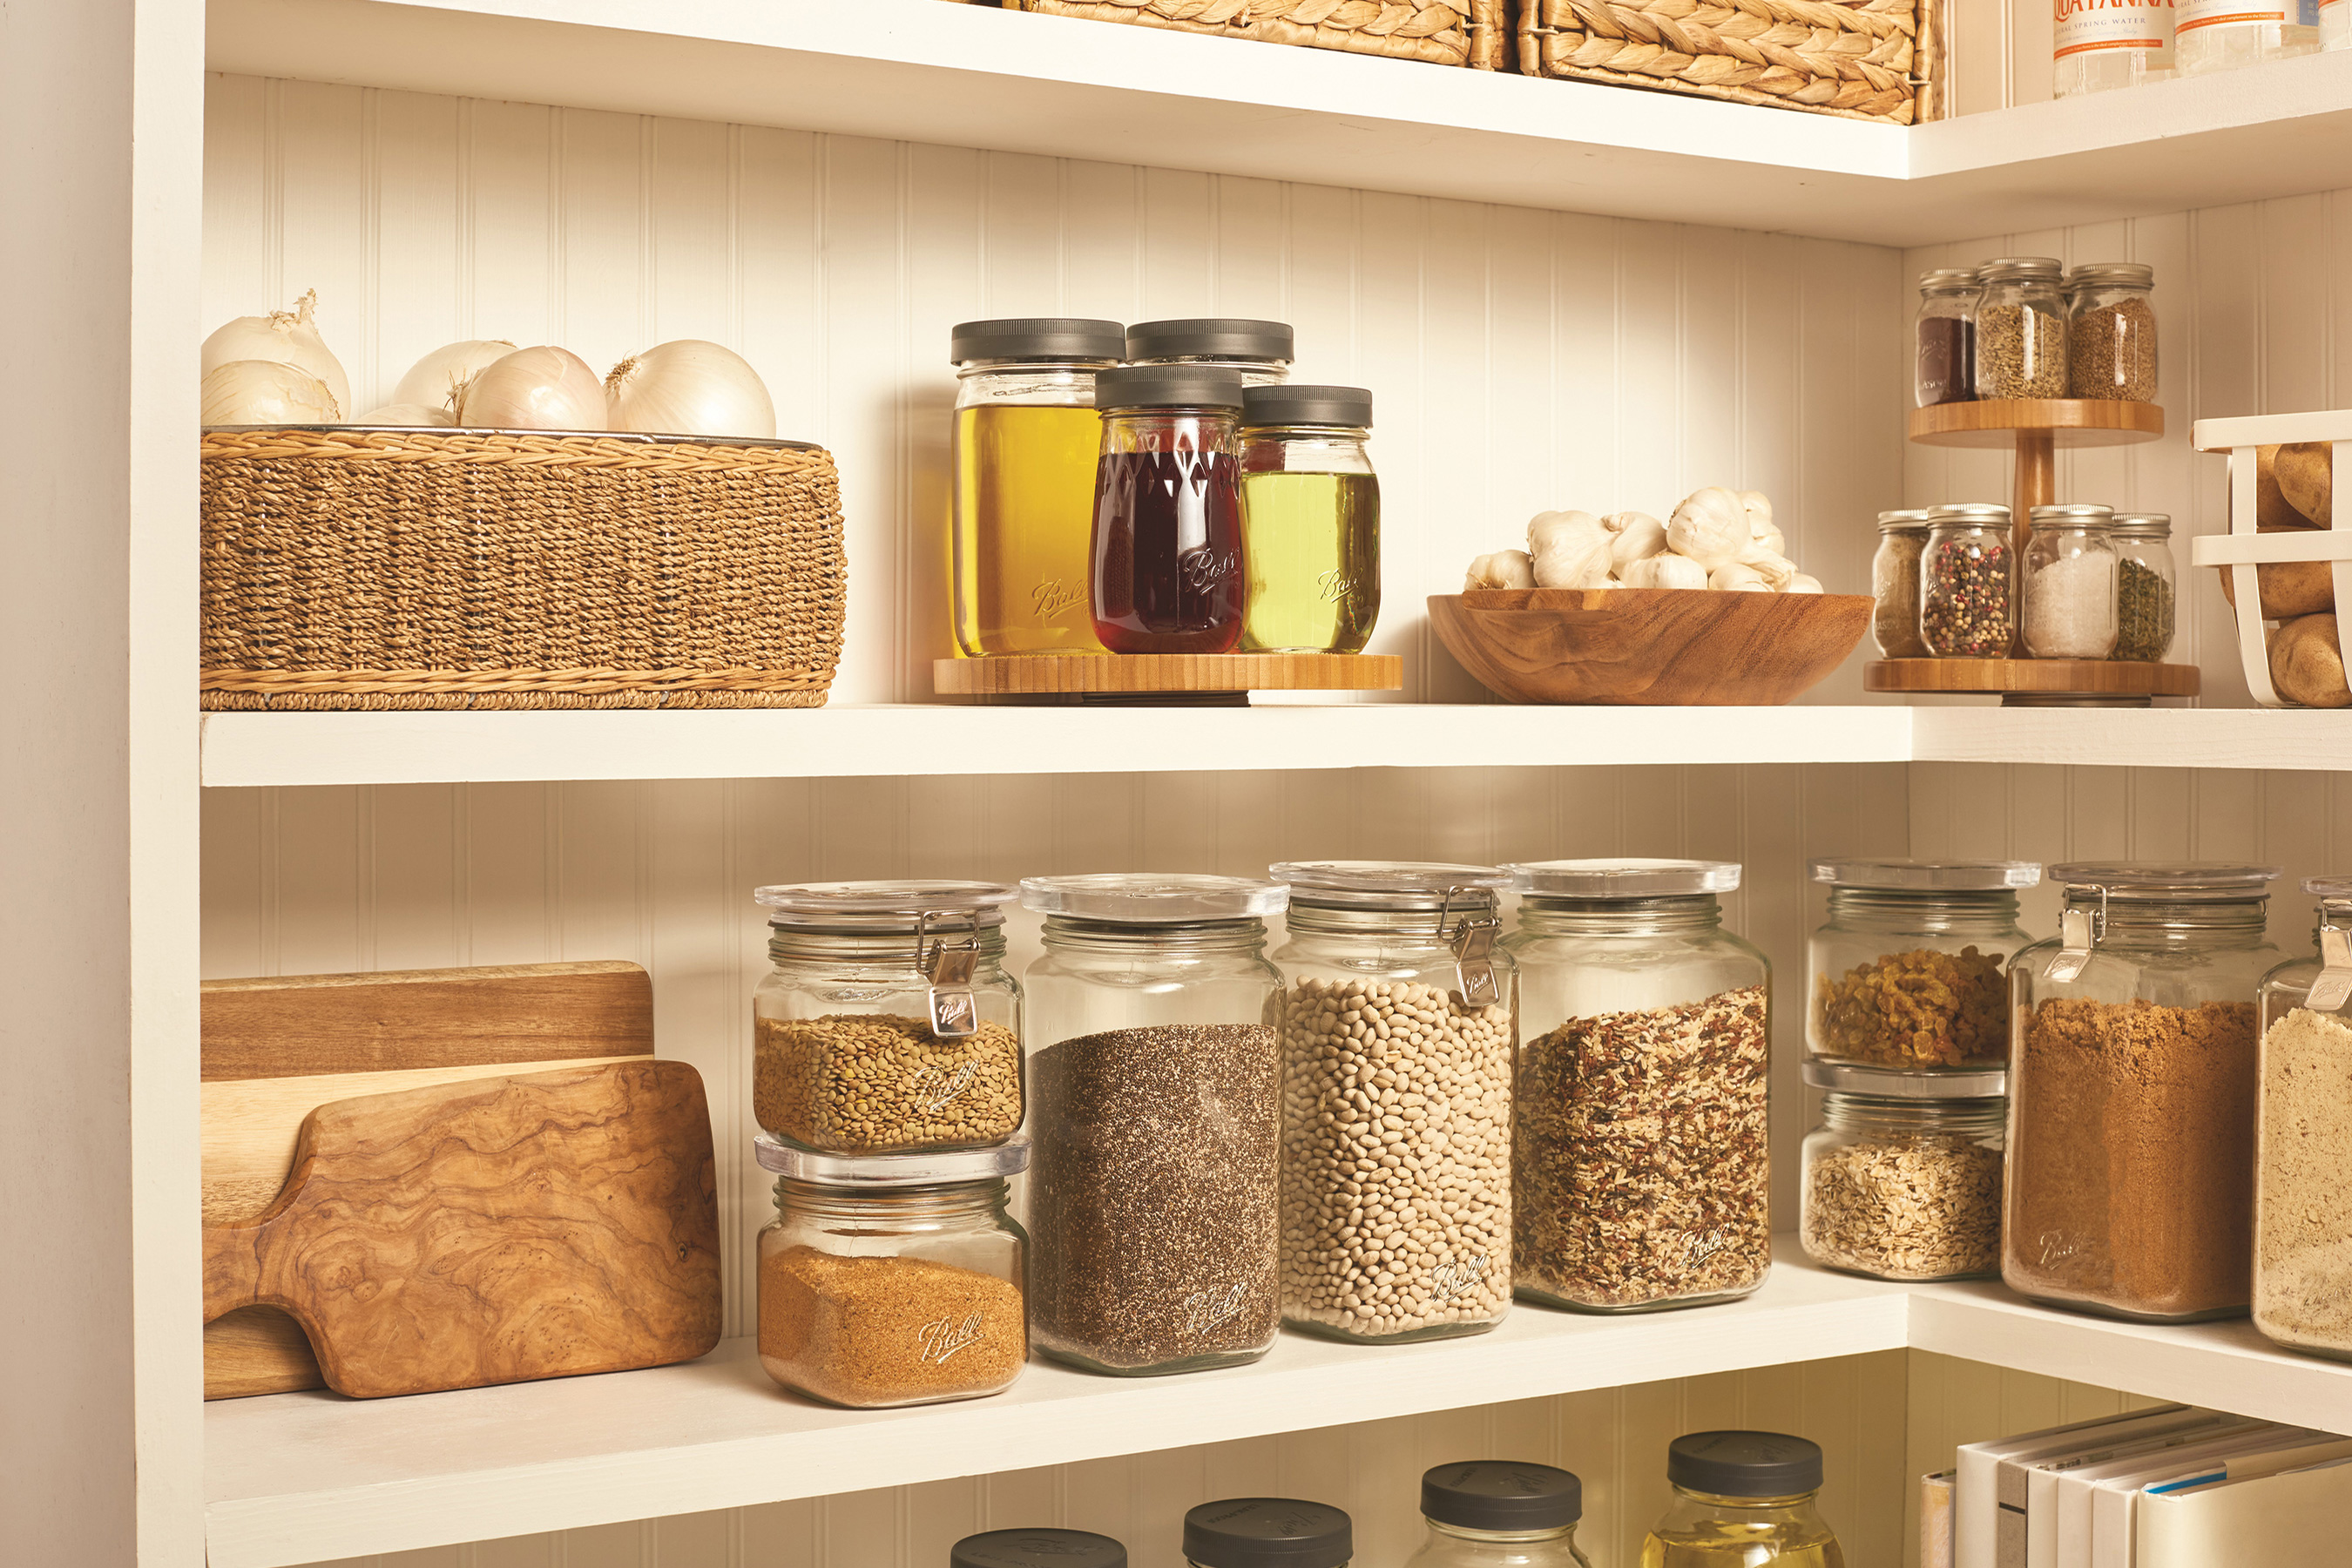 The makers of Ball® home canning products are adding new Ball® Stack & Store Jars to its pantry and storage collection. Ball® Stack & Store Jars are airtight and stackable, providing space-efficient organization for all pantry needs.